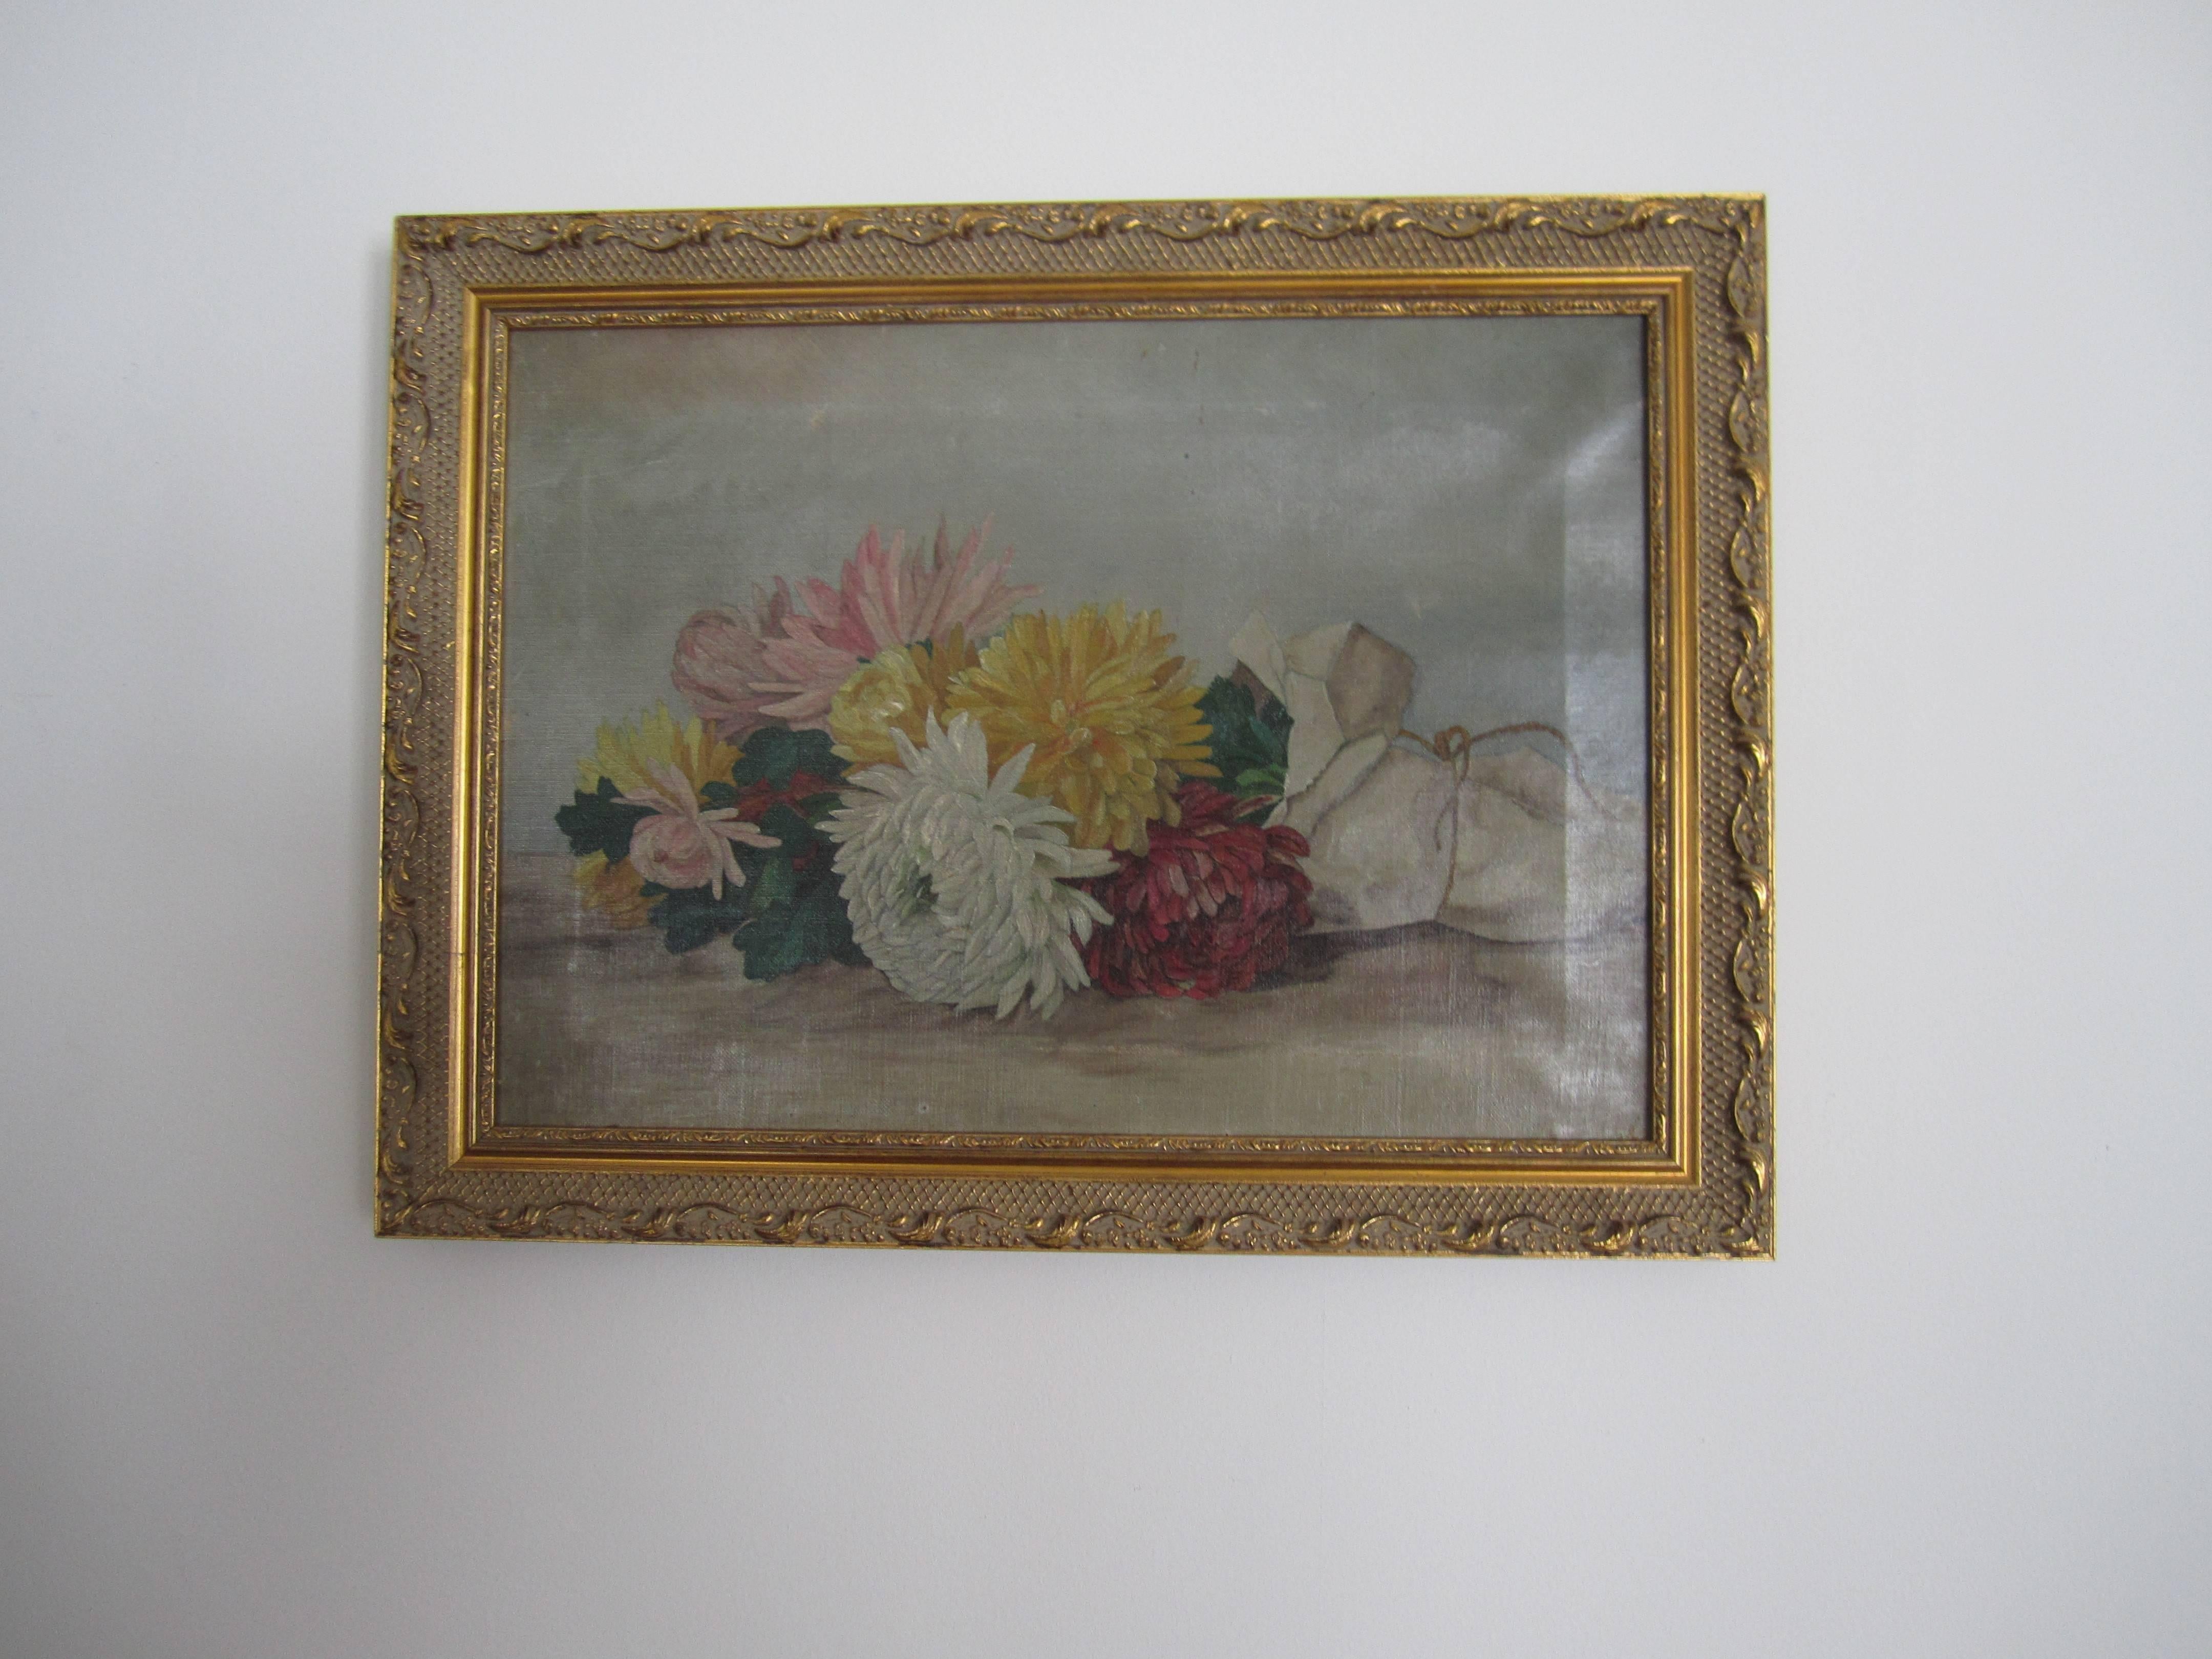 A late 19th century - early 20th century colorful still life painting. Painting depicts a 'fresh bouquet of flowers' wrapped in paper with string tie. Painting is on a stretched canvas, surrounded by a giltwood frame. Colors include: green, yellow,